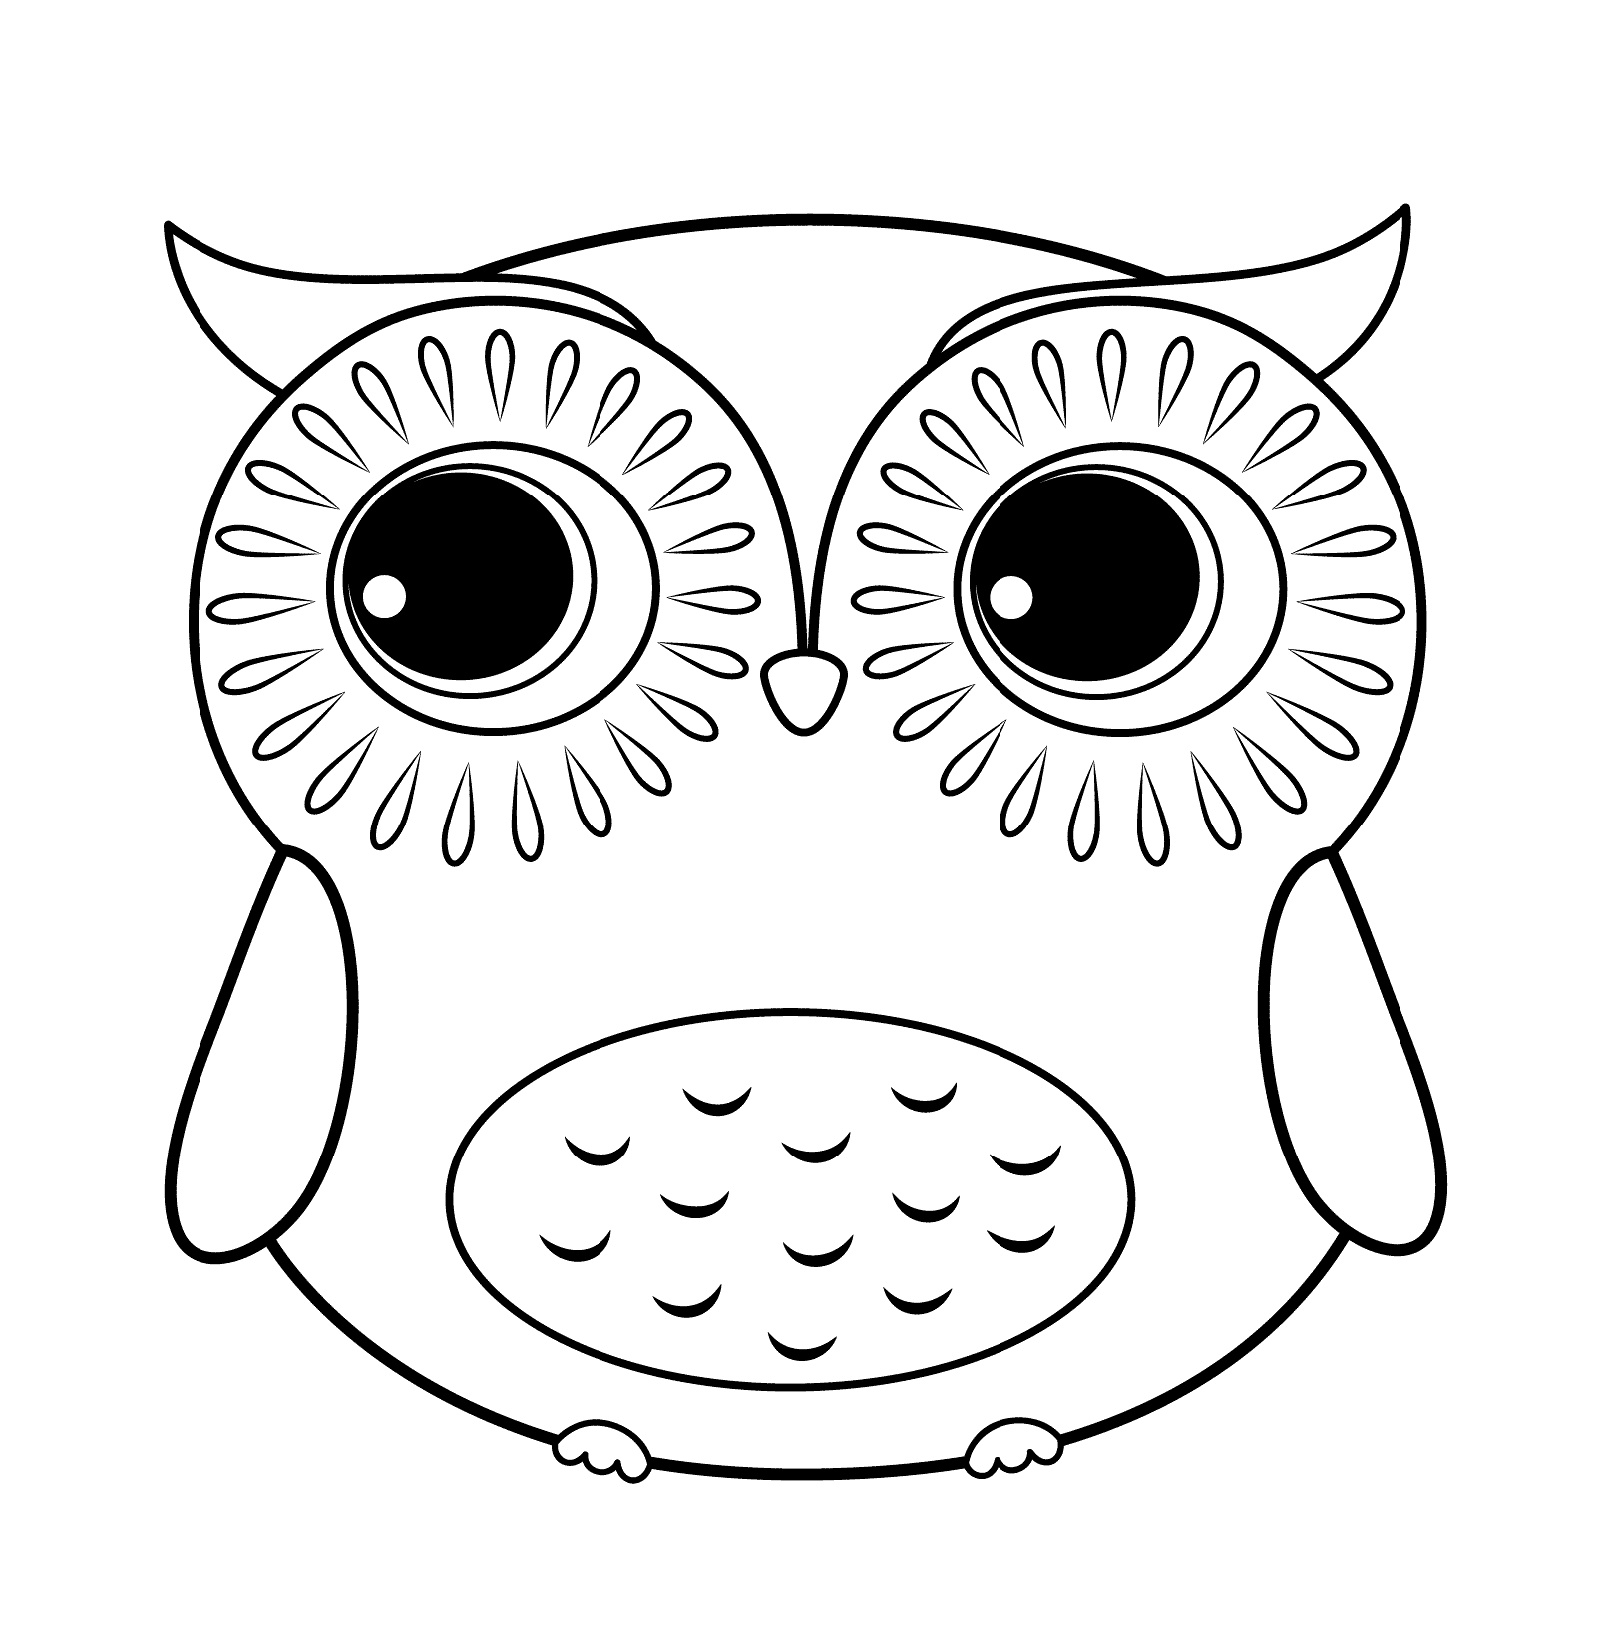 Adorable Cute Owl Coloring Pages Pdf Free - Free Adorable Cute Owl Coloring Pages